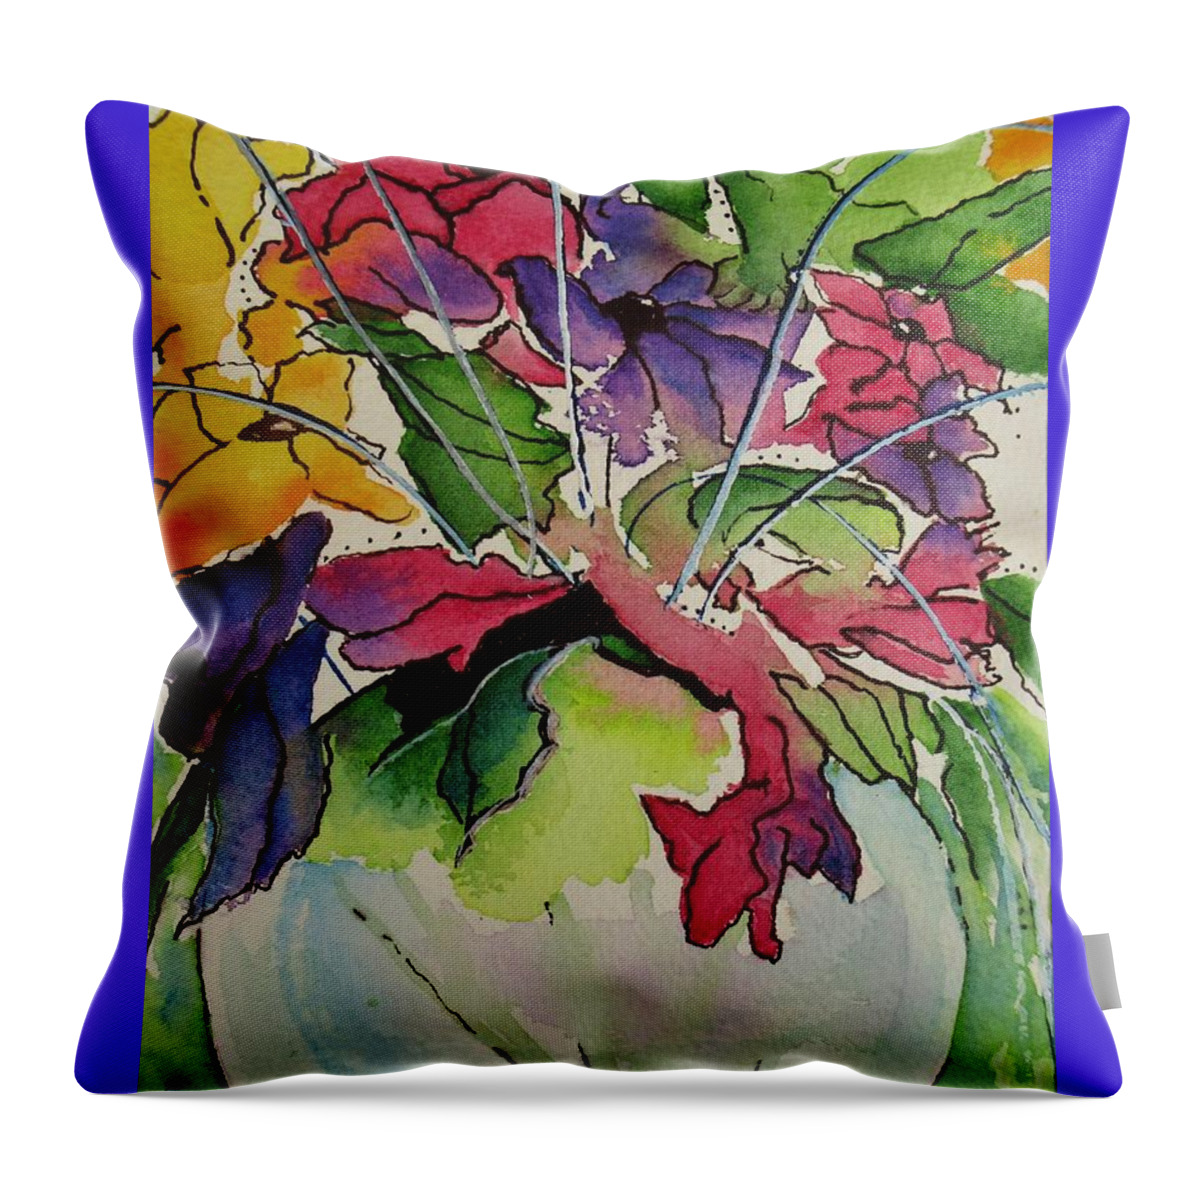 Comforting Moments Throw Pillow featuring the painting Antidote To Winter by Dale Bernard